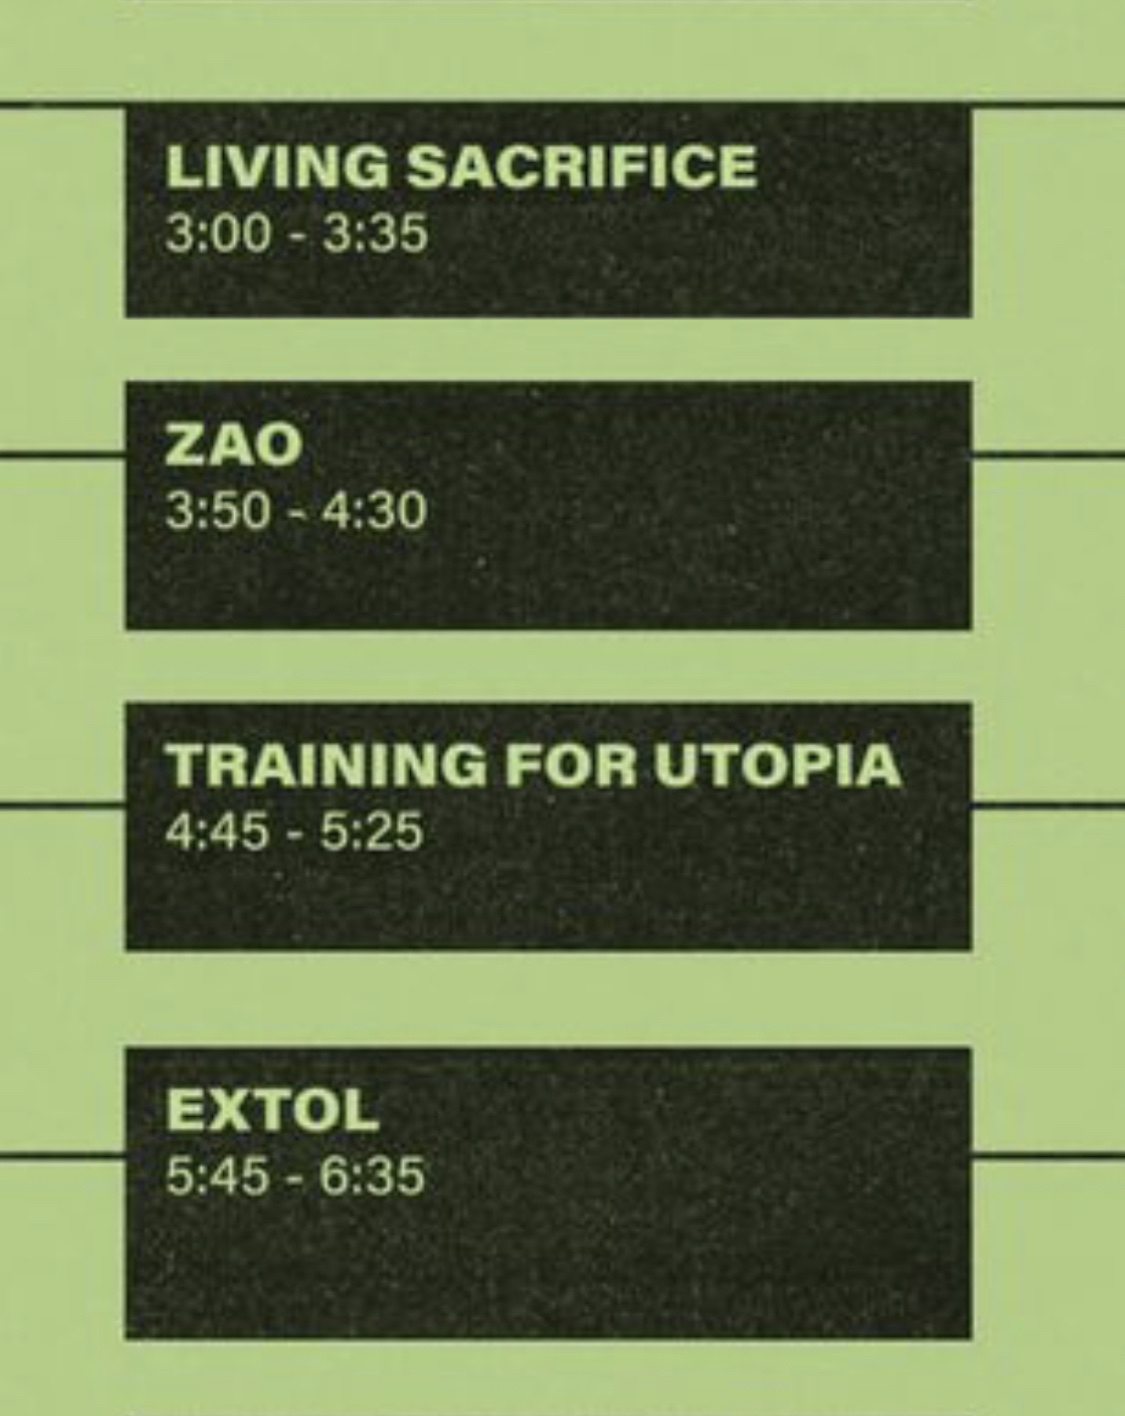 Living Sacrifice, Zao, Training For Utopia, Extol all playing once after another.